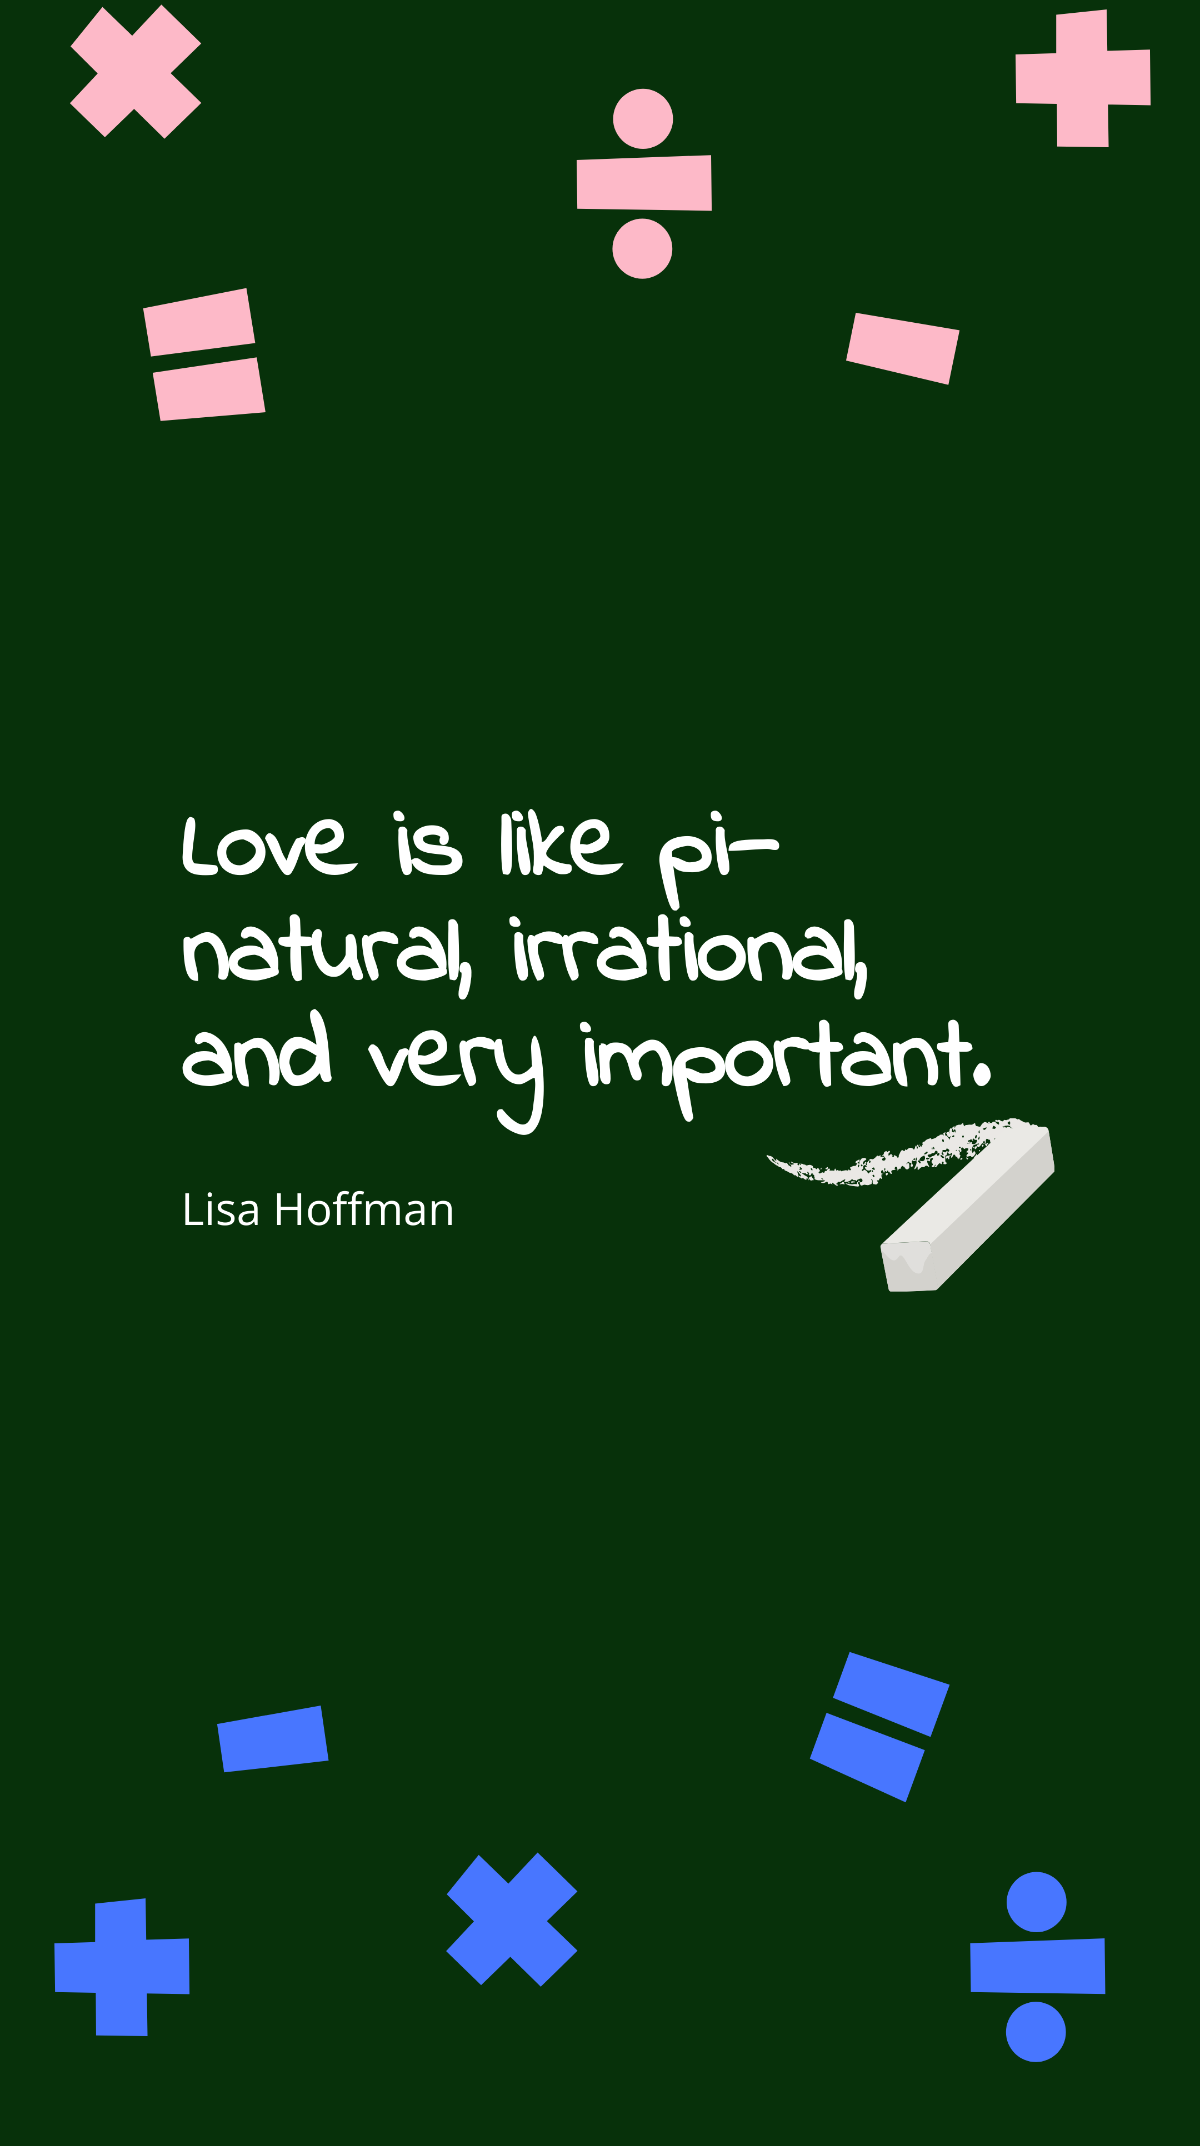 Free Lisa Hoffman - “Love is like pi – natural, irrational, and very important.” Template